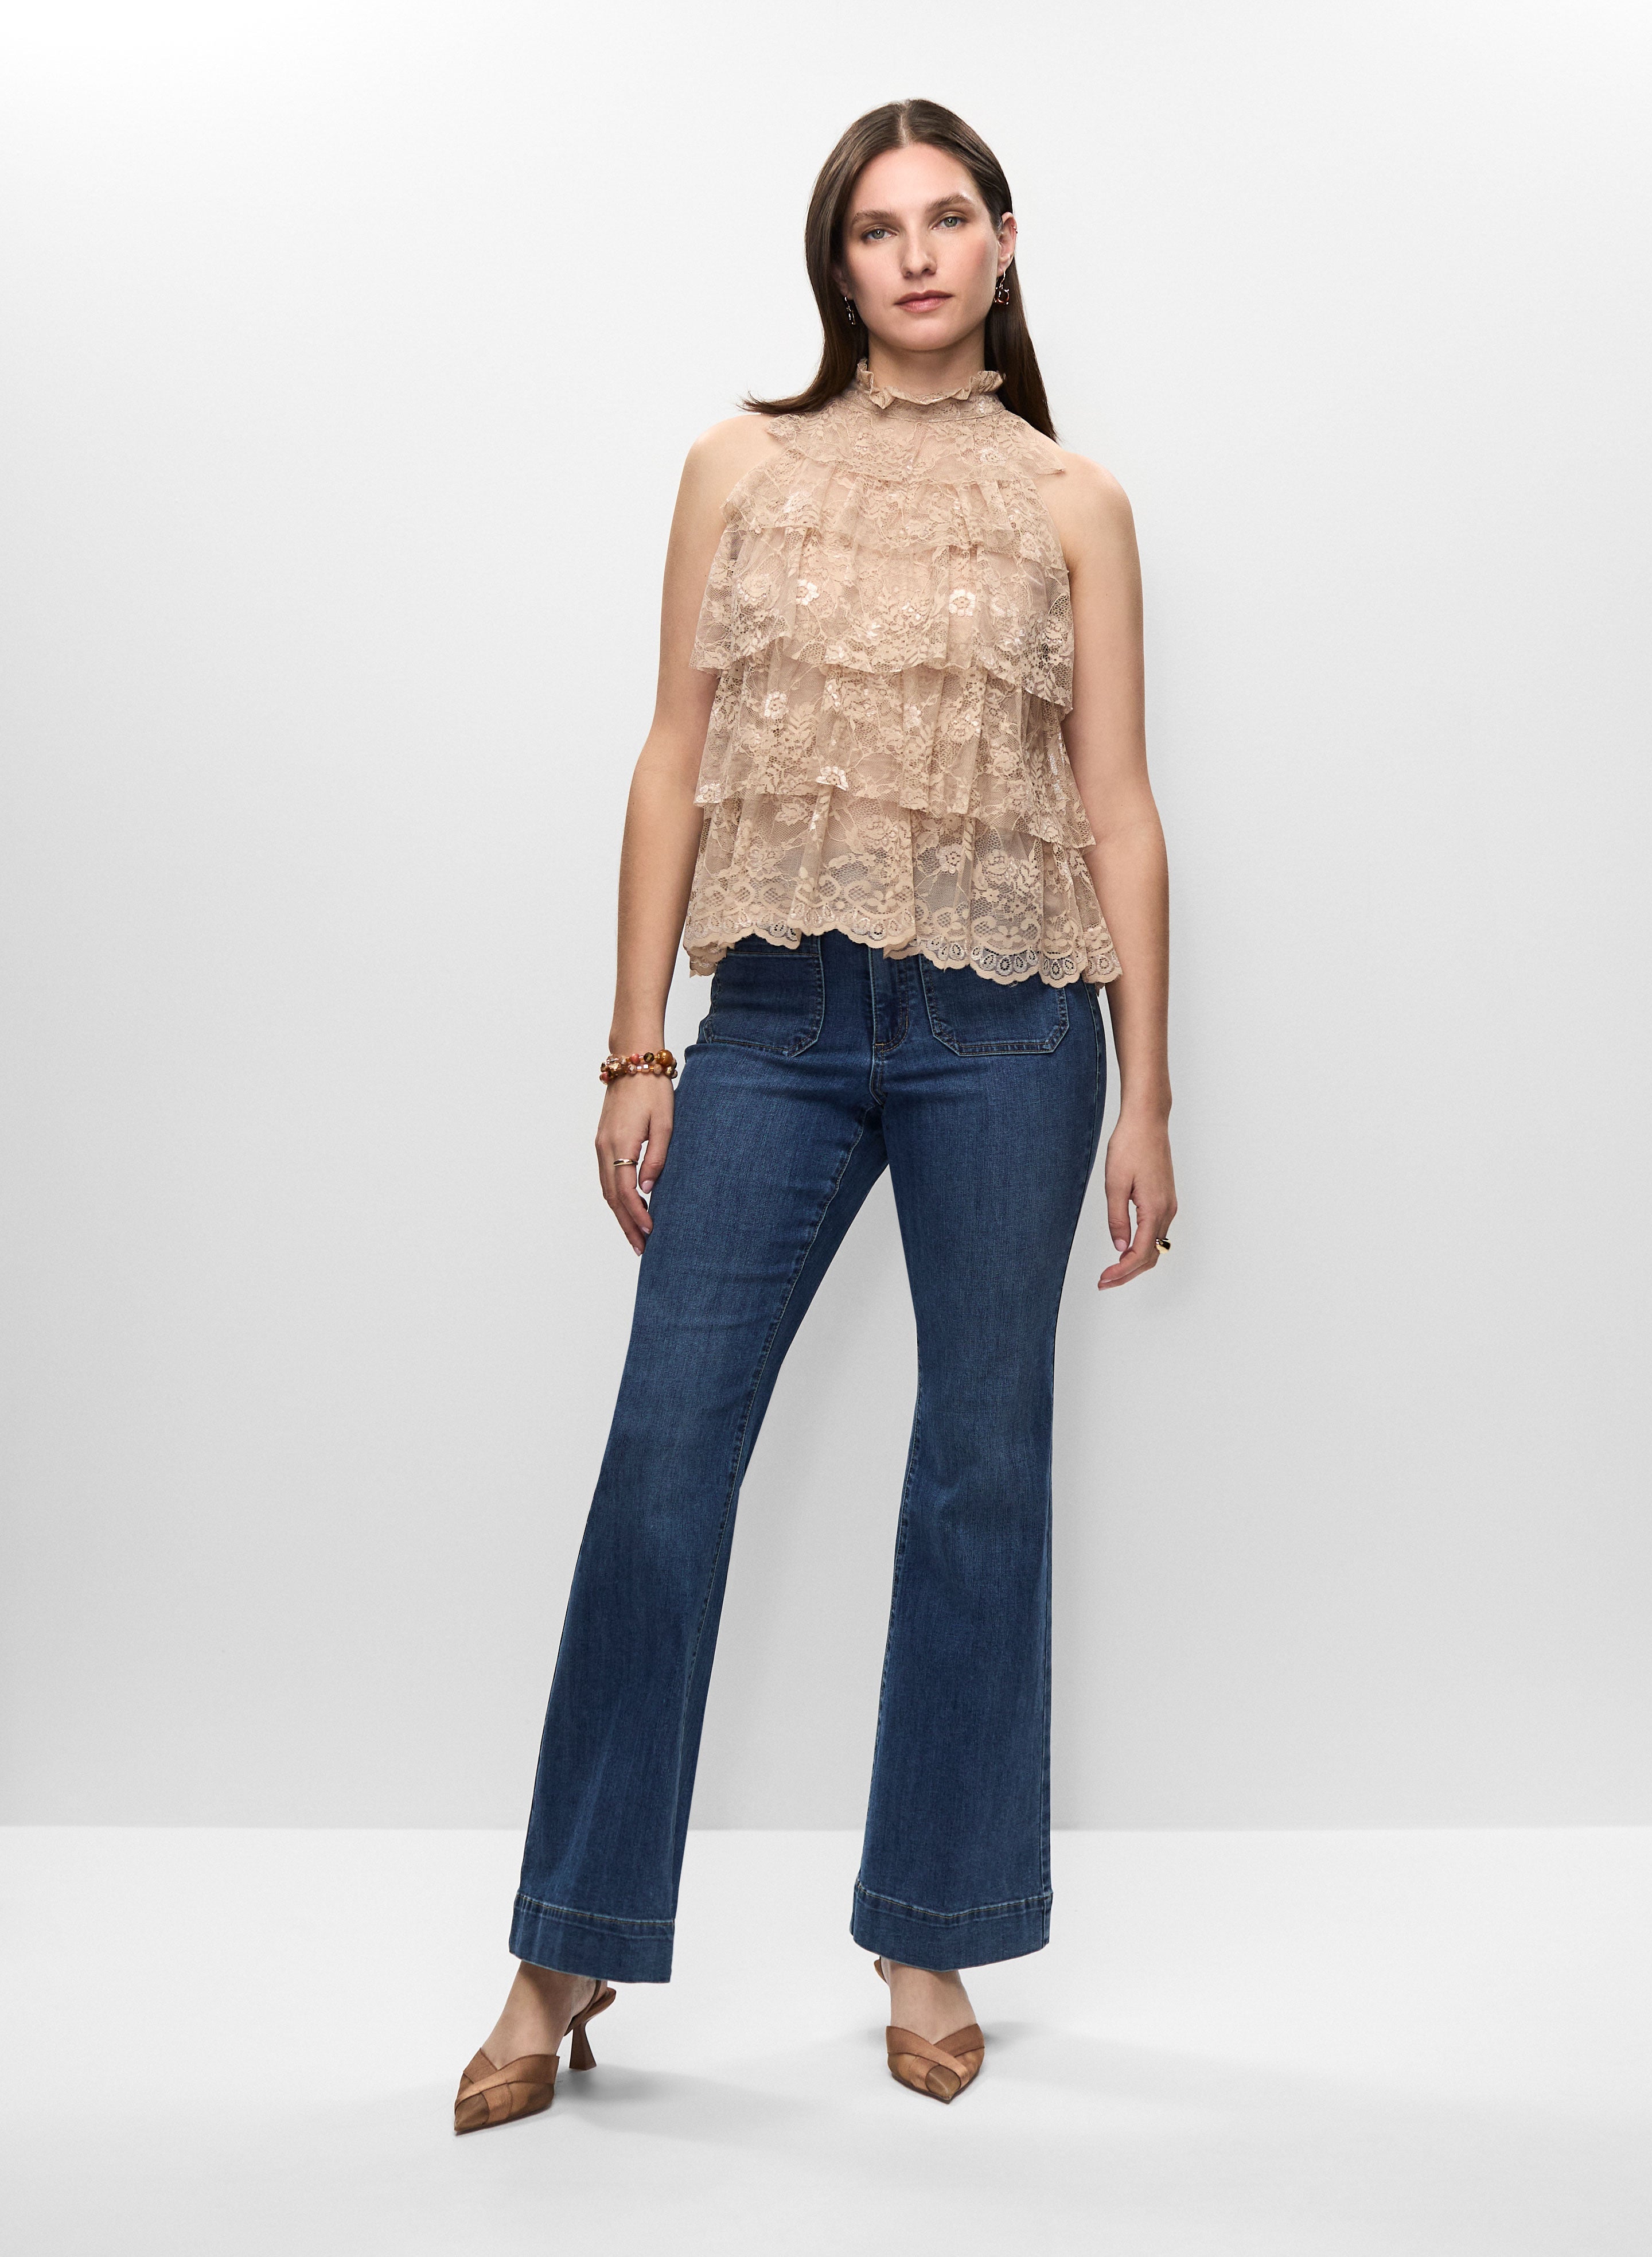 Tiered Lace Sleeveless Top & Flare Leg Jeans